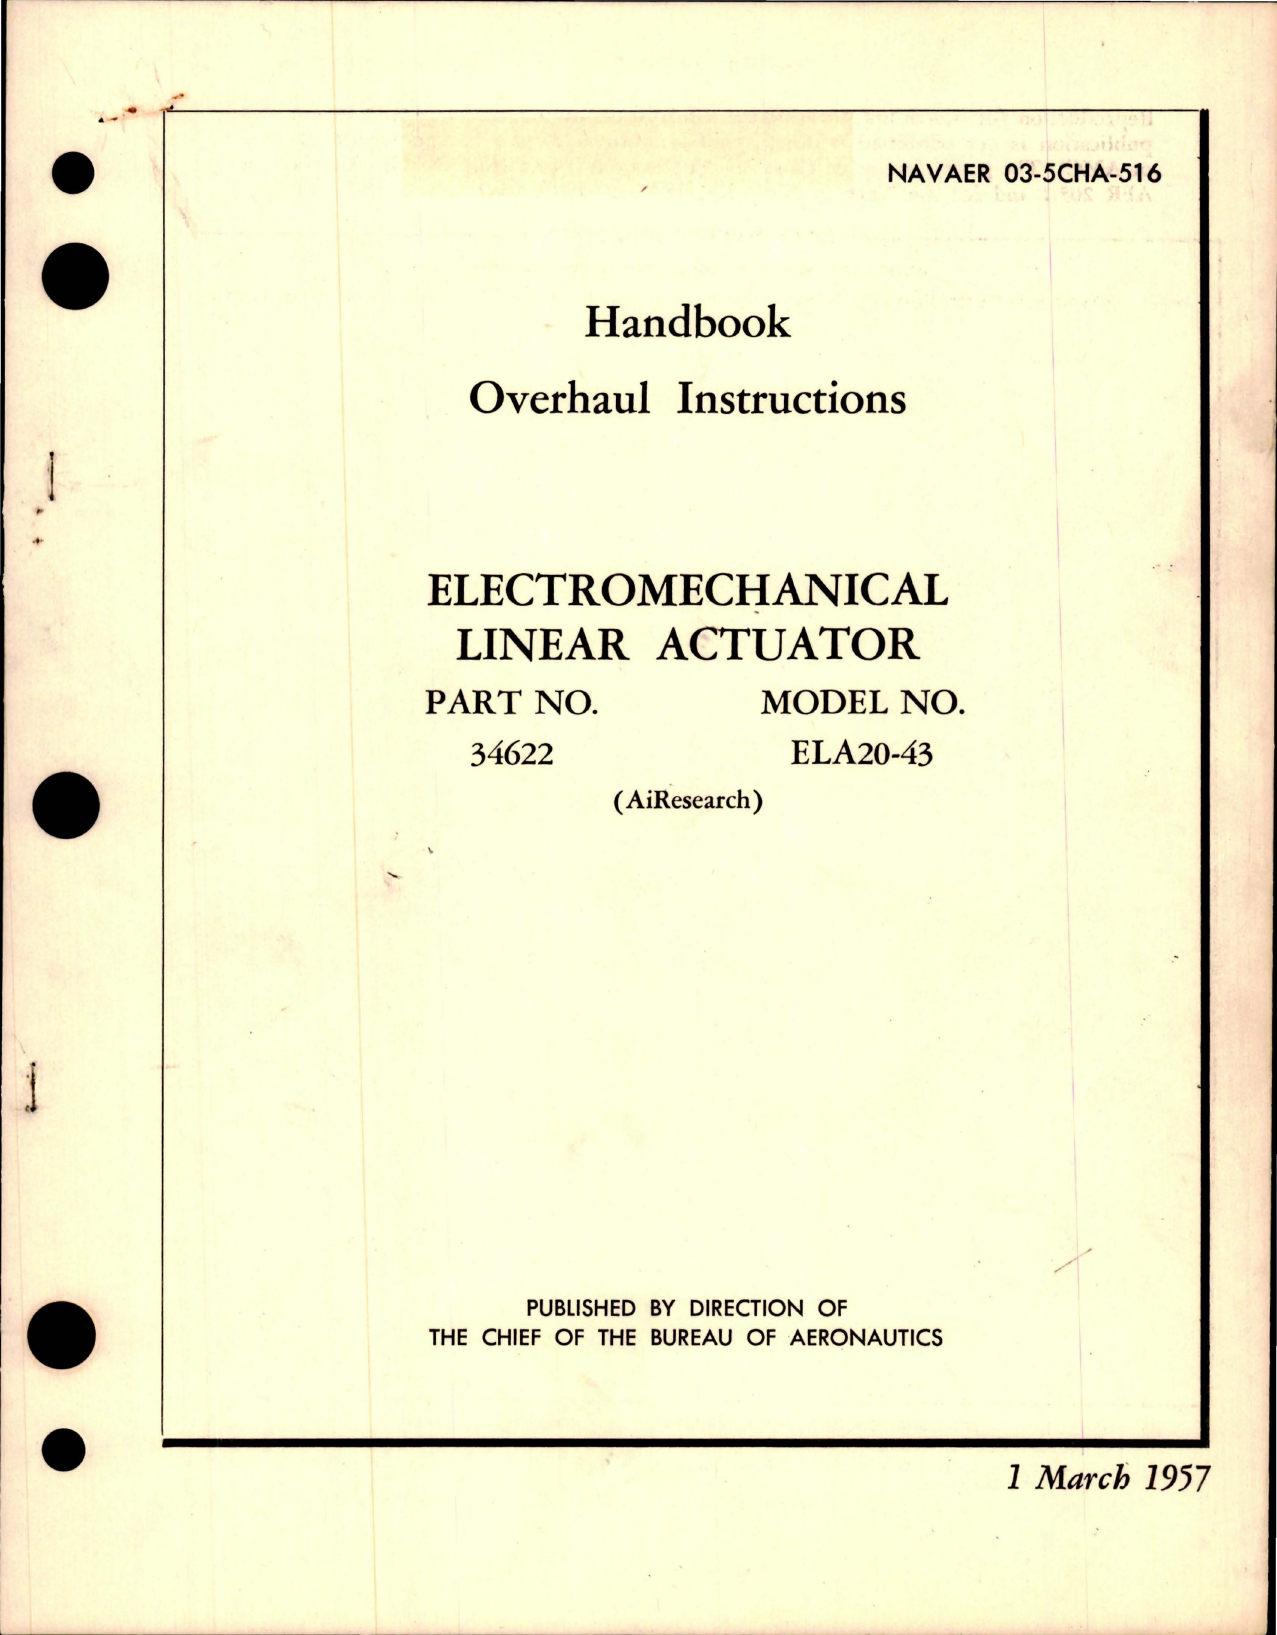 Sample page 1 from AirCorps Library document: Overhaul Instructions for Electromechanical Linear Actuator - Part 34622 - Model ELA20-43 